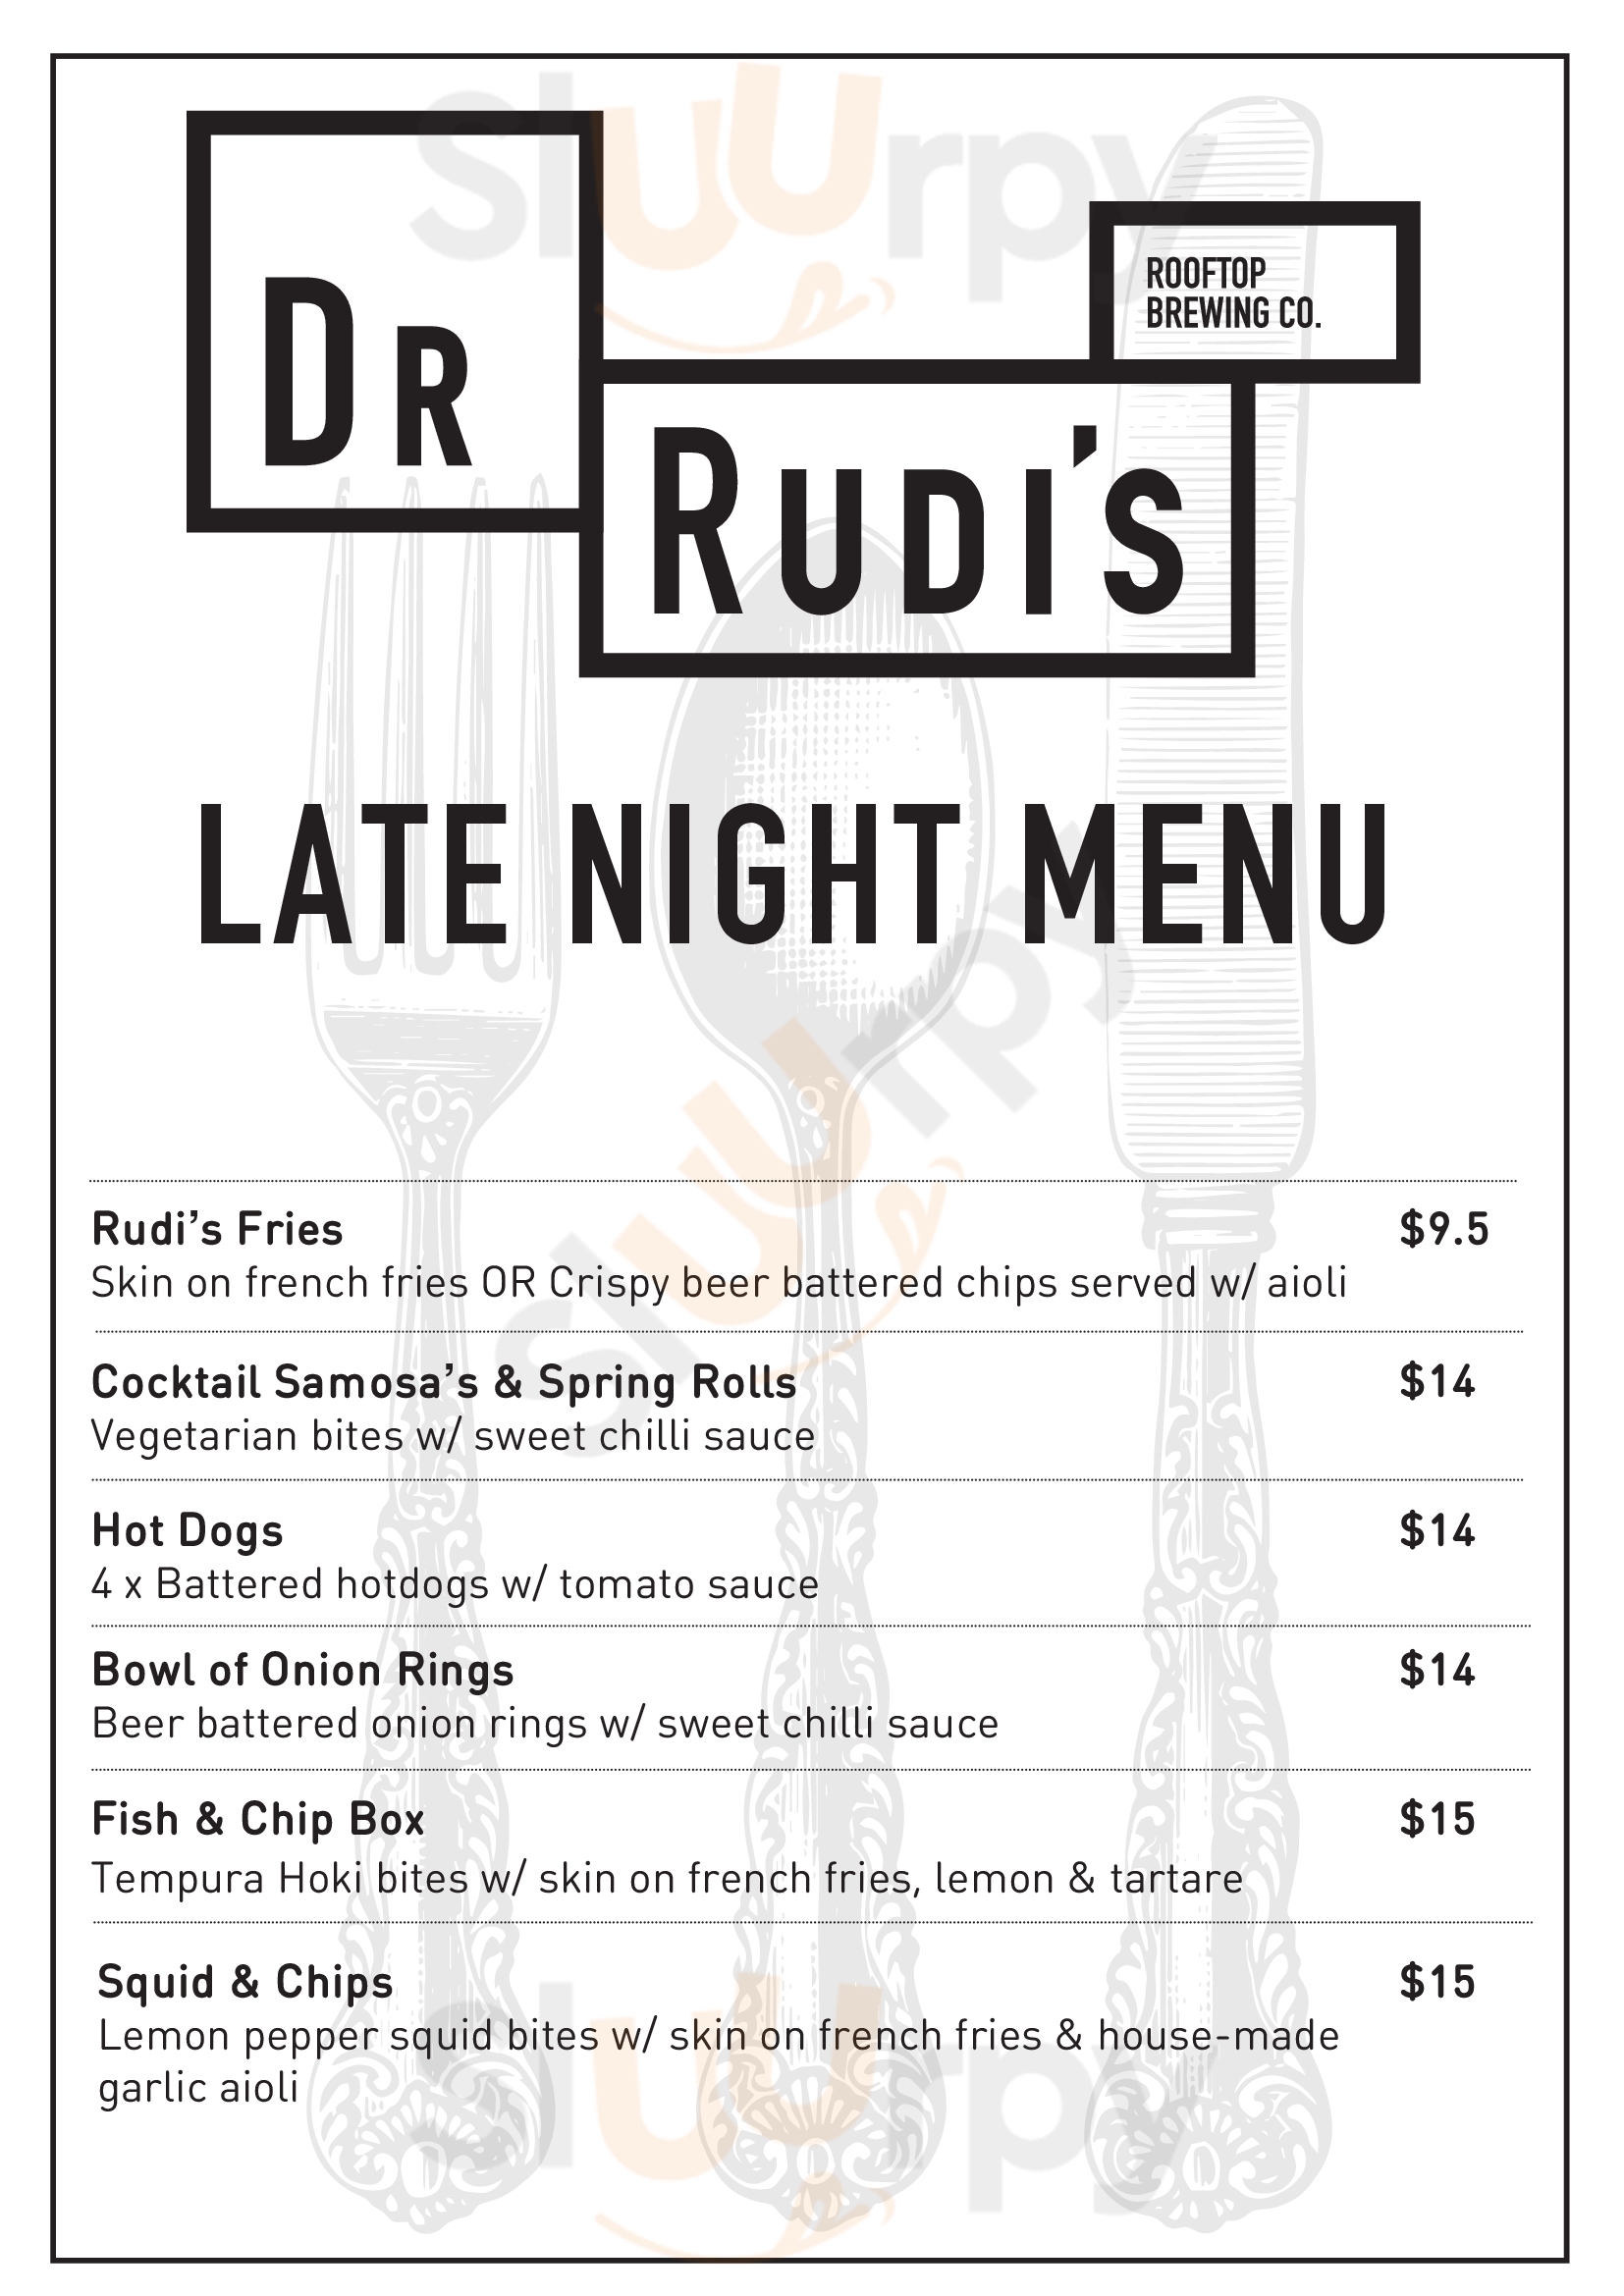 Dr Rudi's Rooftop Brewing Co. Auckland Central Menu - 1